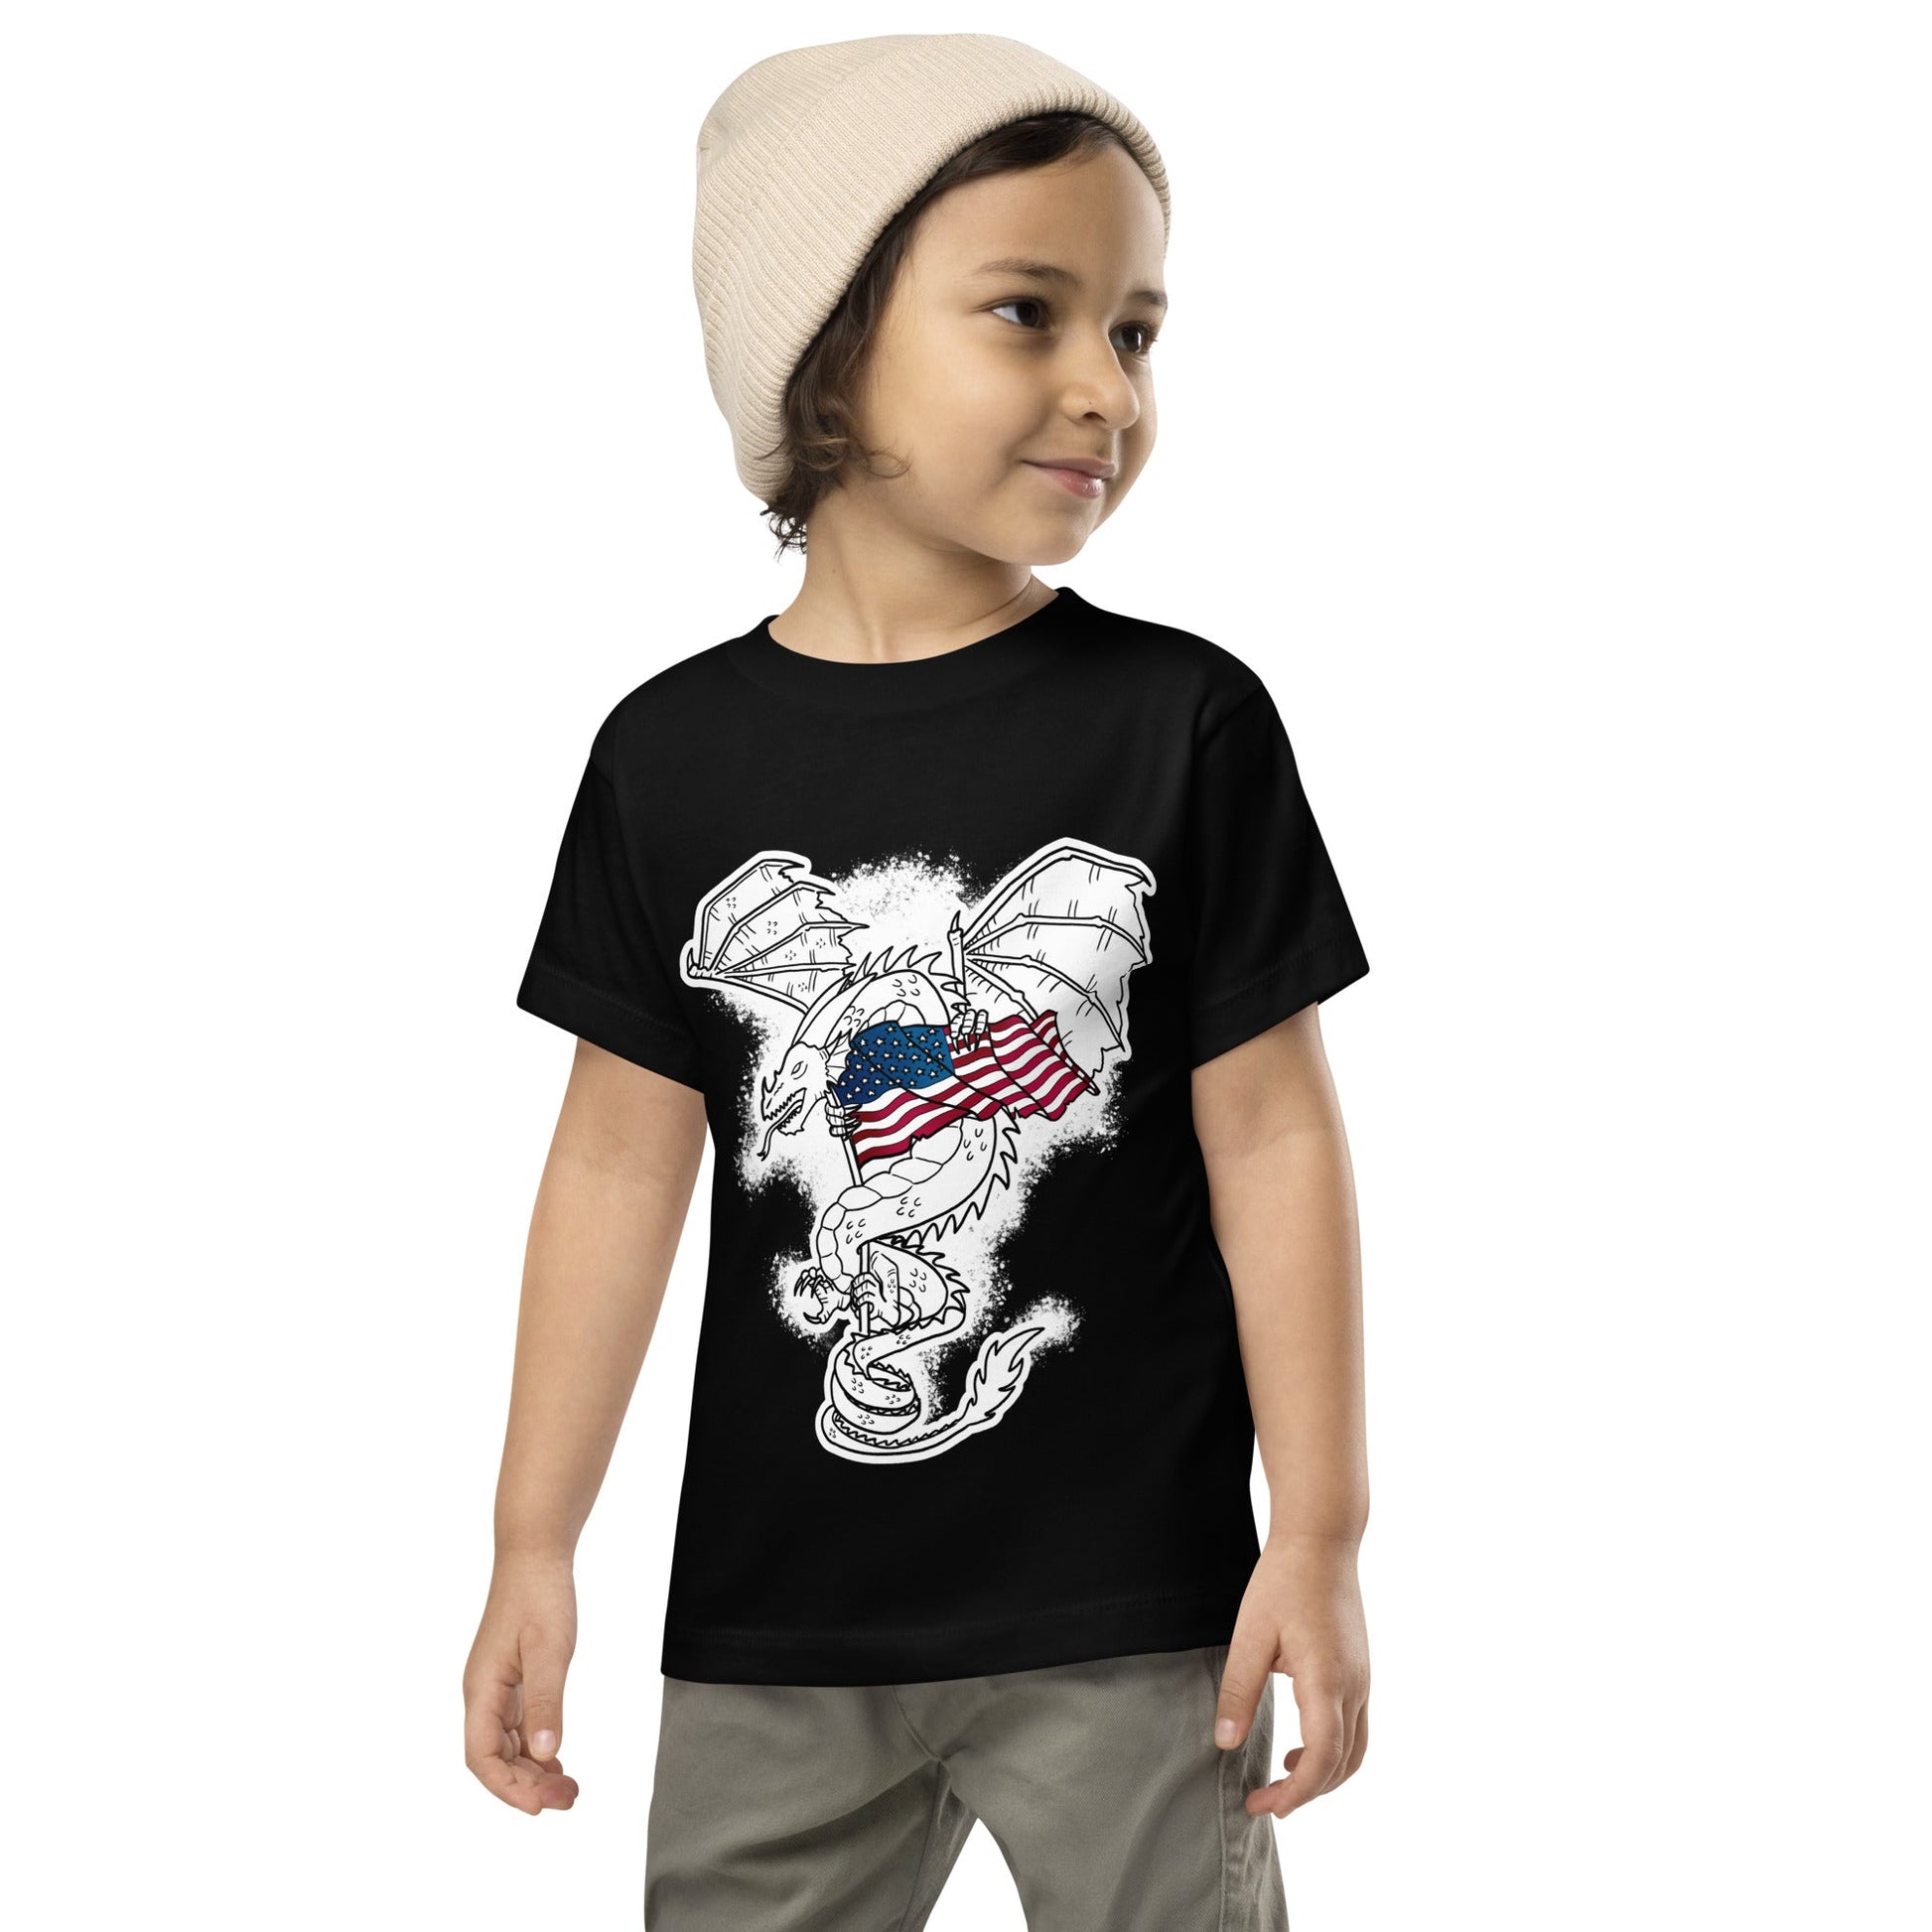 Dragon with US Flag | Toddler Short Sleeve Tee